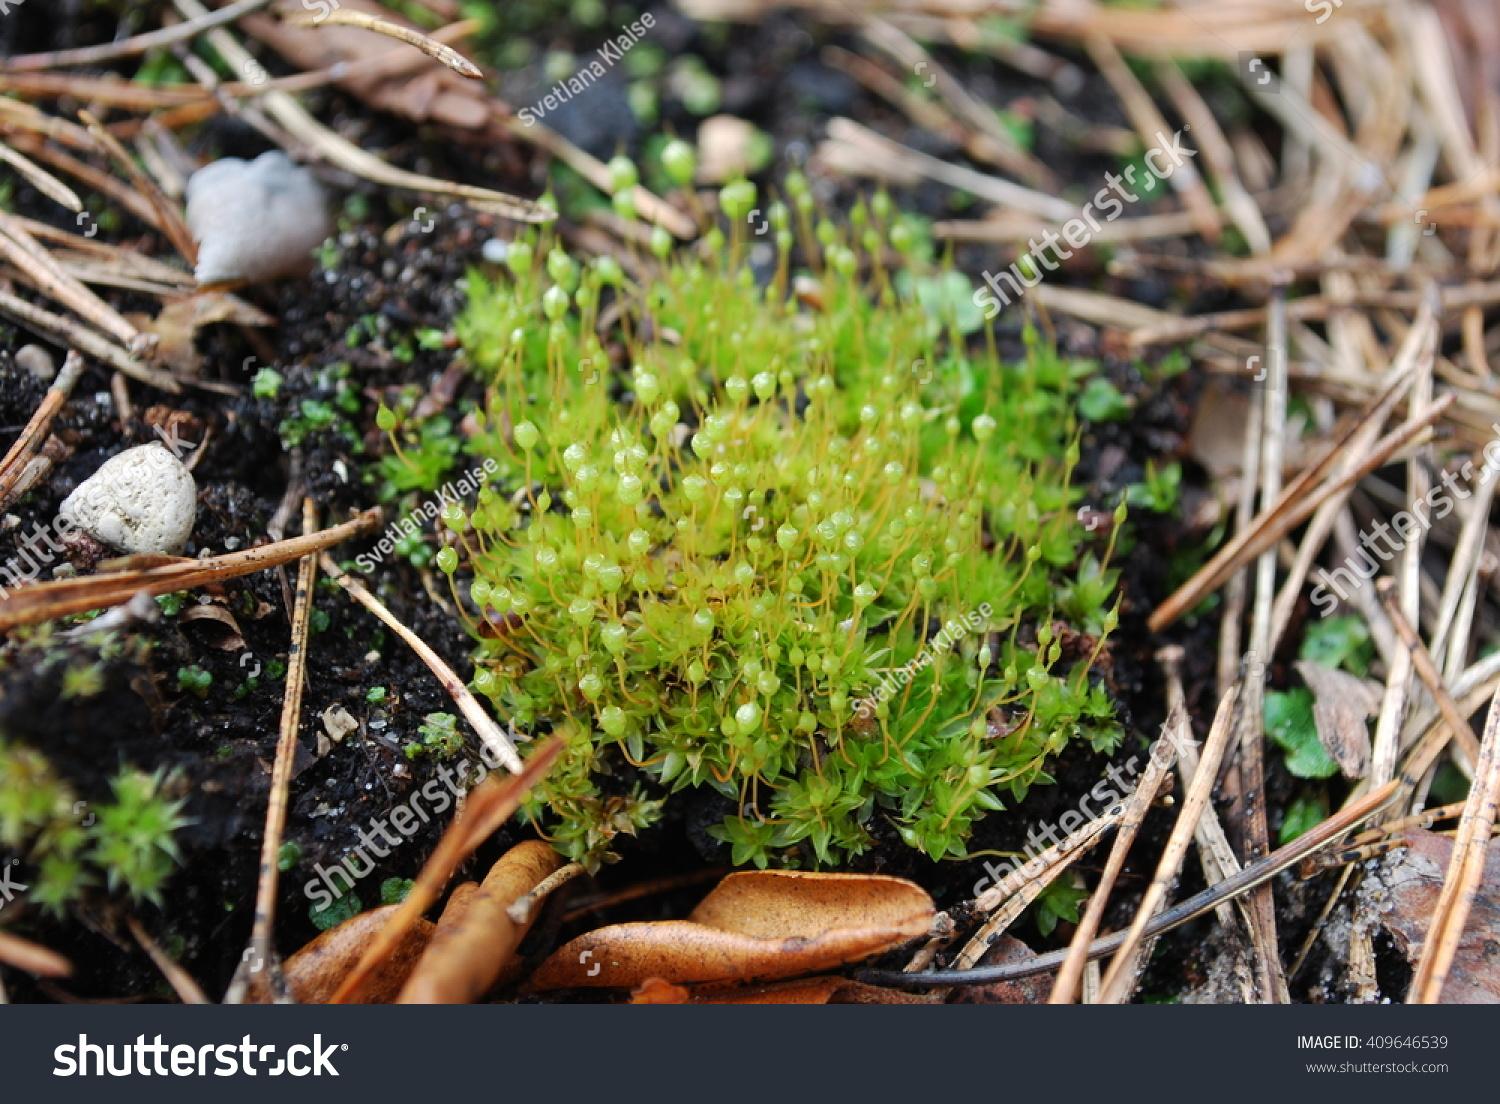 stock-photo-bartramia-pomiformis-the-common-apple-moss-is-a-species-of-moss-in-the-bartramiaceae-family-it-409646539.jpg